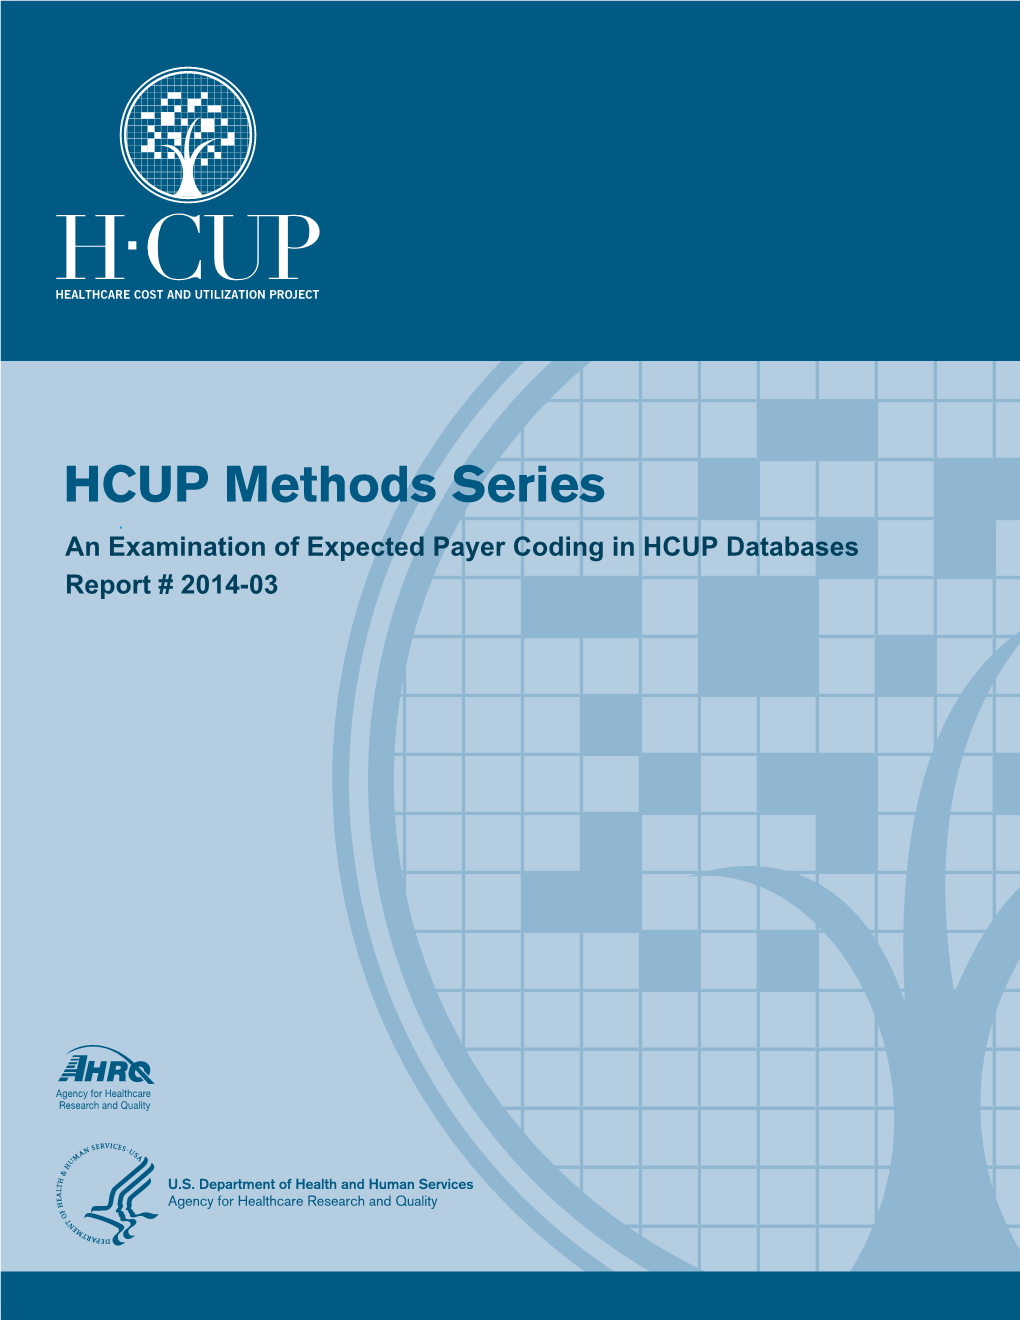 2014-03: an Examination of Expected Payer Coding in HCUP Databases